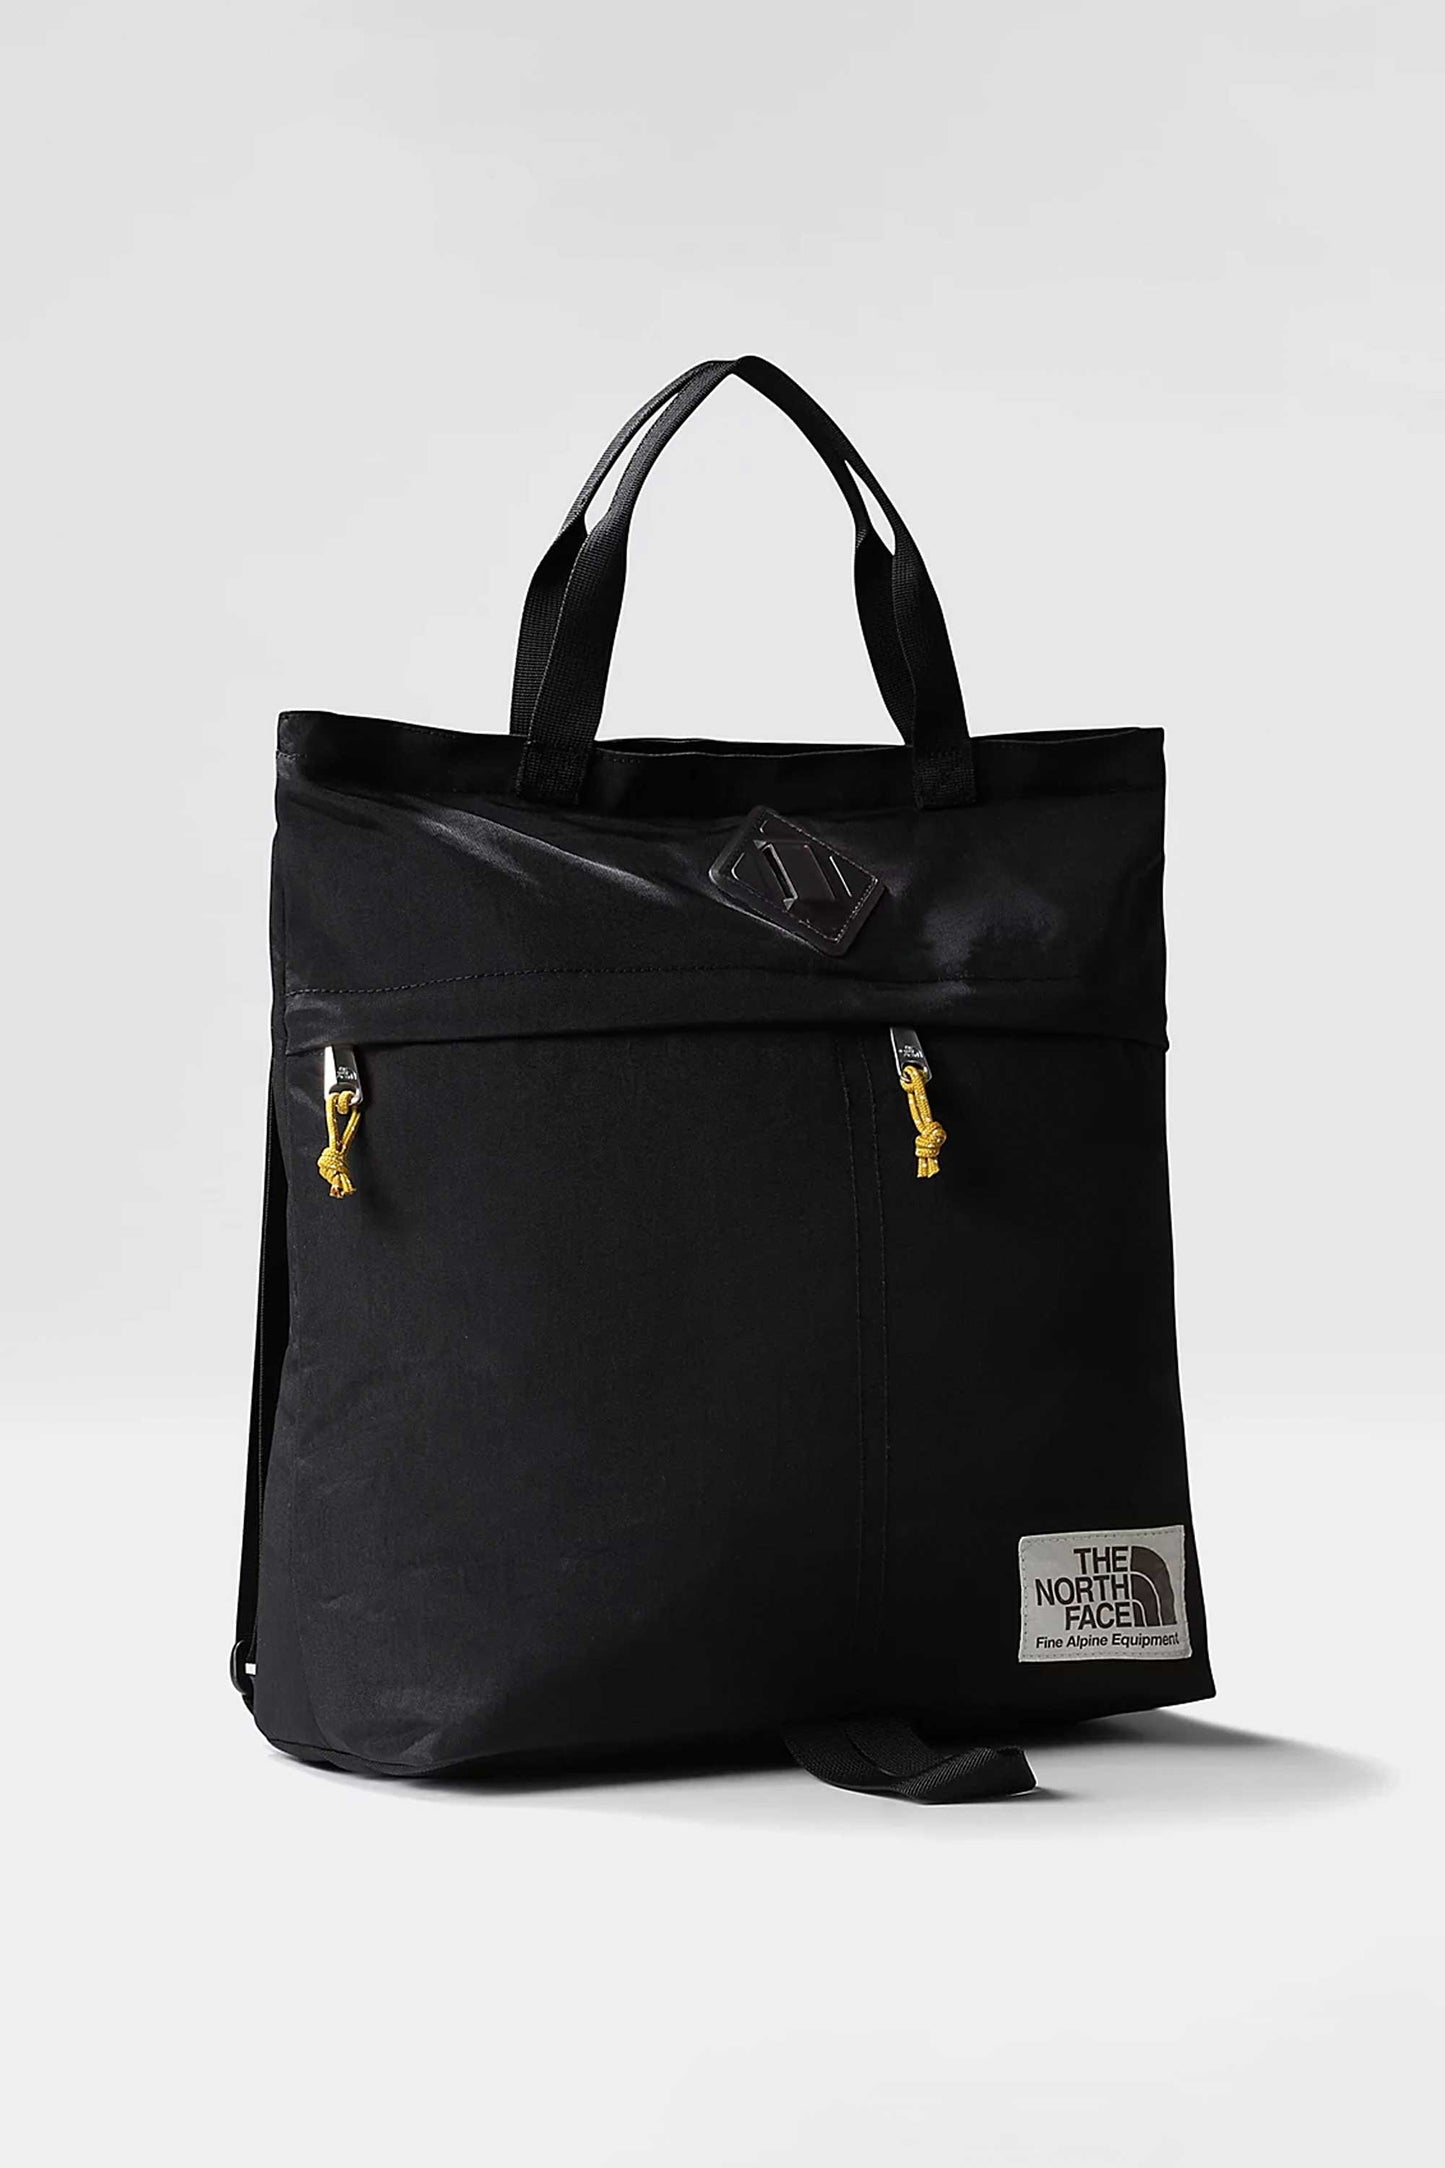 THE NORTH FACE - BERKELEY TOTE PACK | Shop at PUKAS SURF SHOP